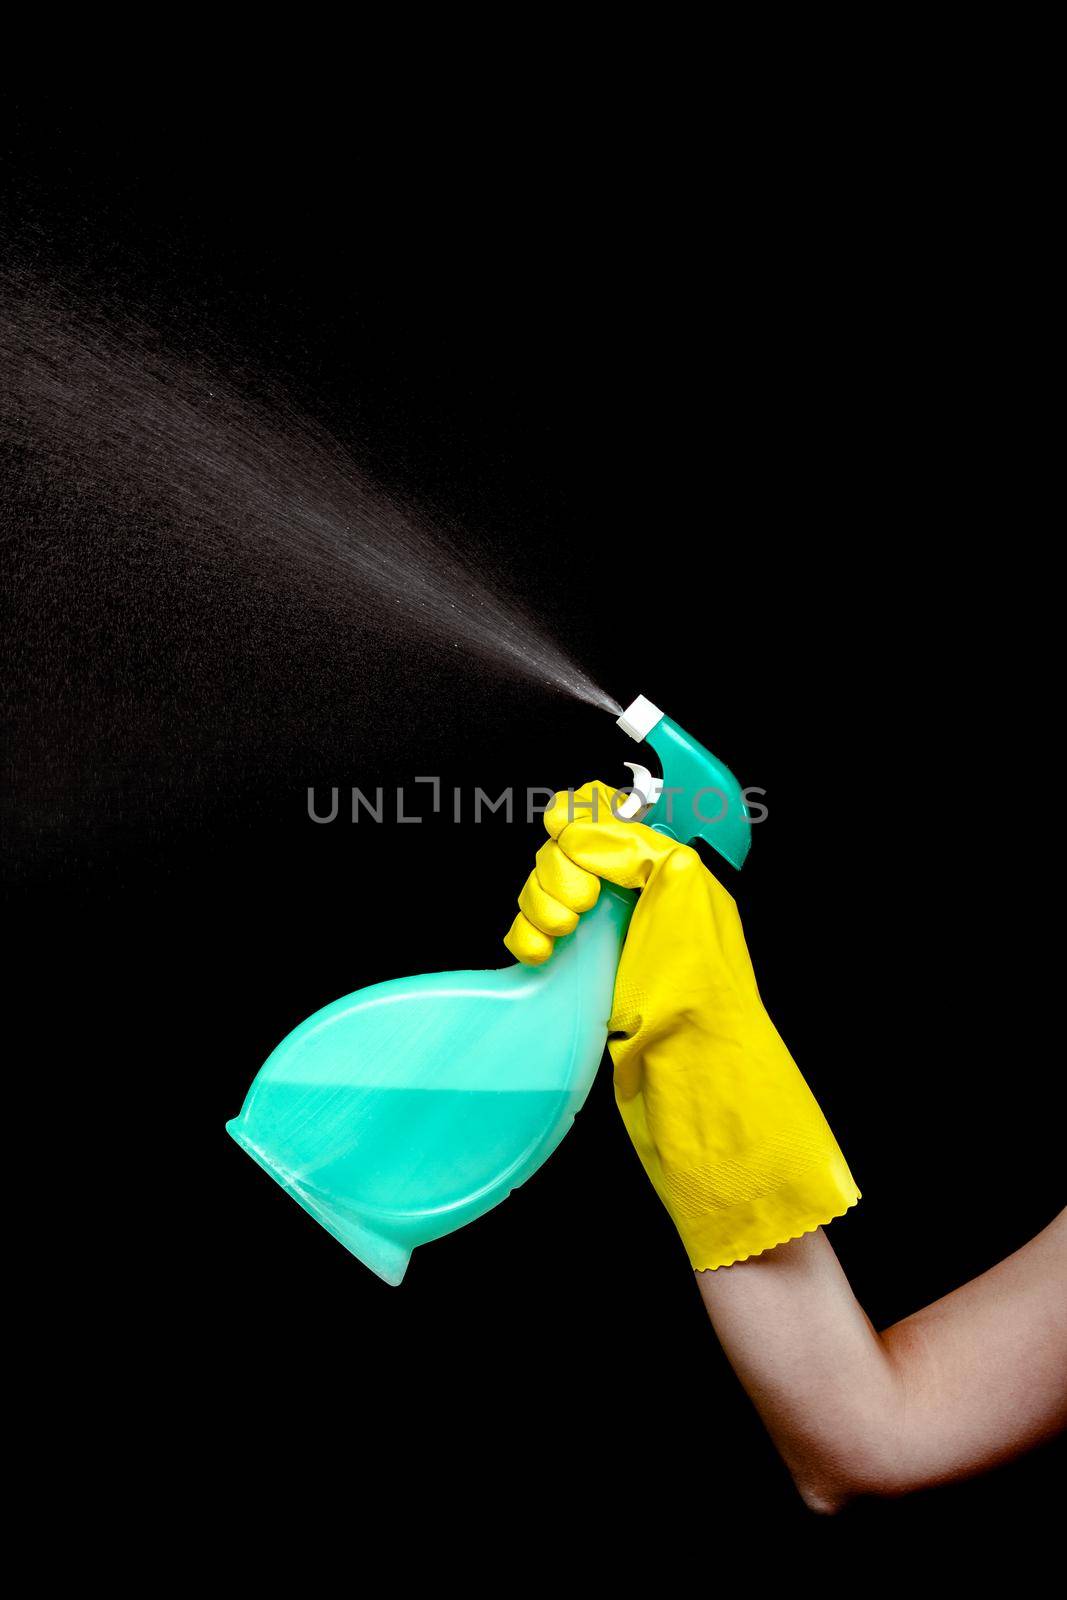 hand in yellow glove spraying liquid cleaning detergent in the air against black background